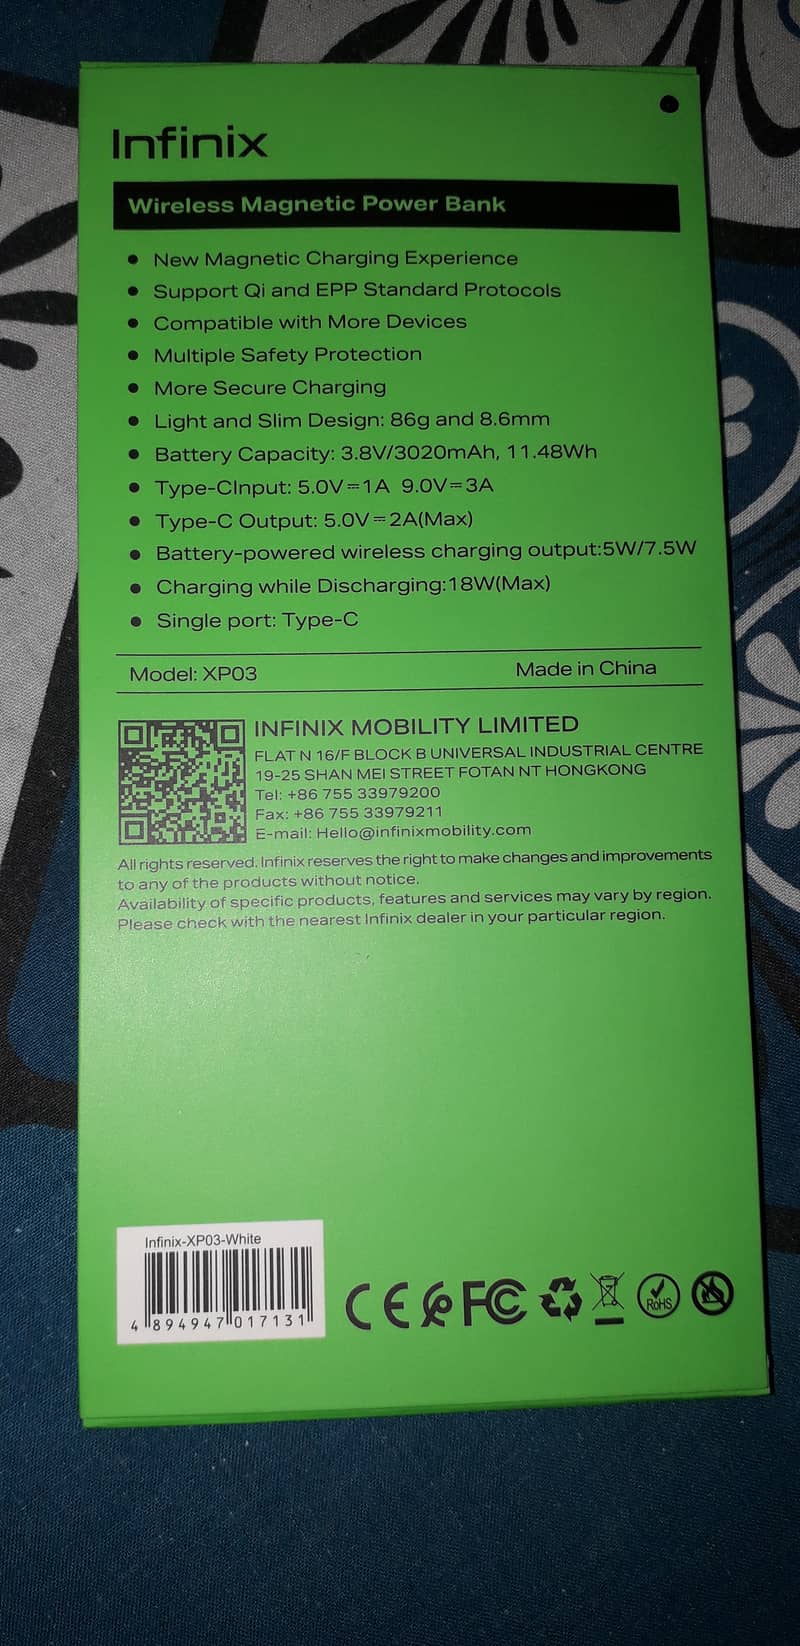 Infinix MAGPOWER Wireless charger 1